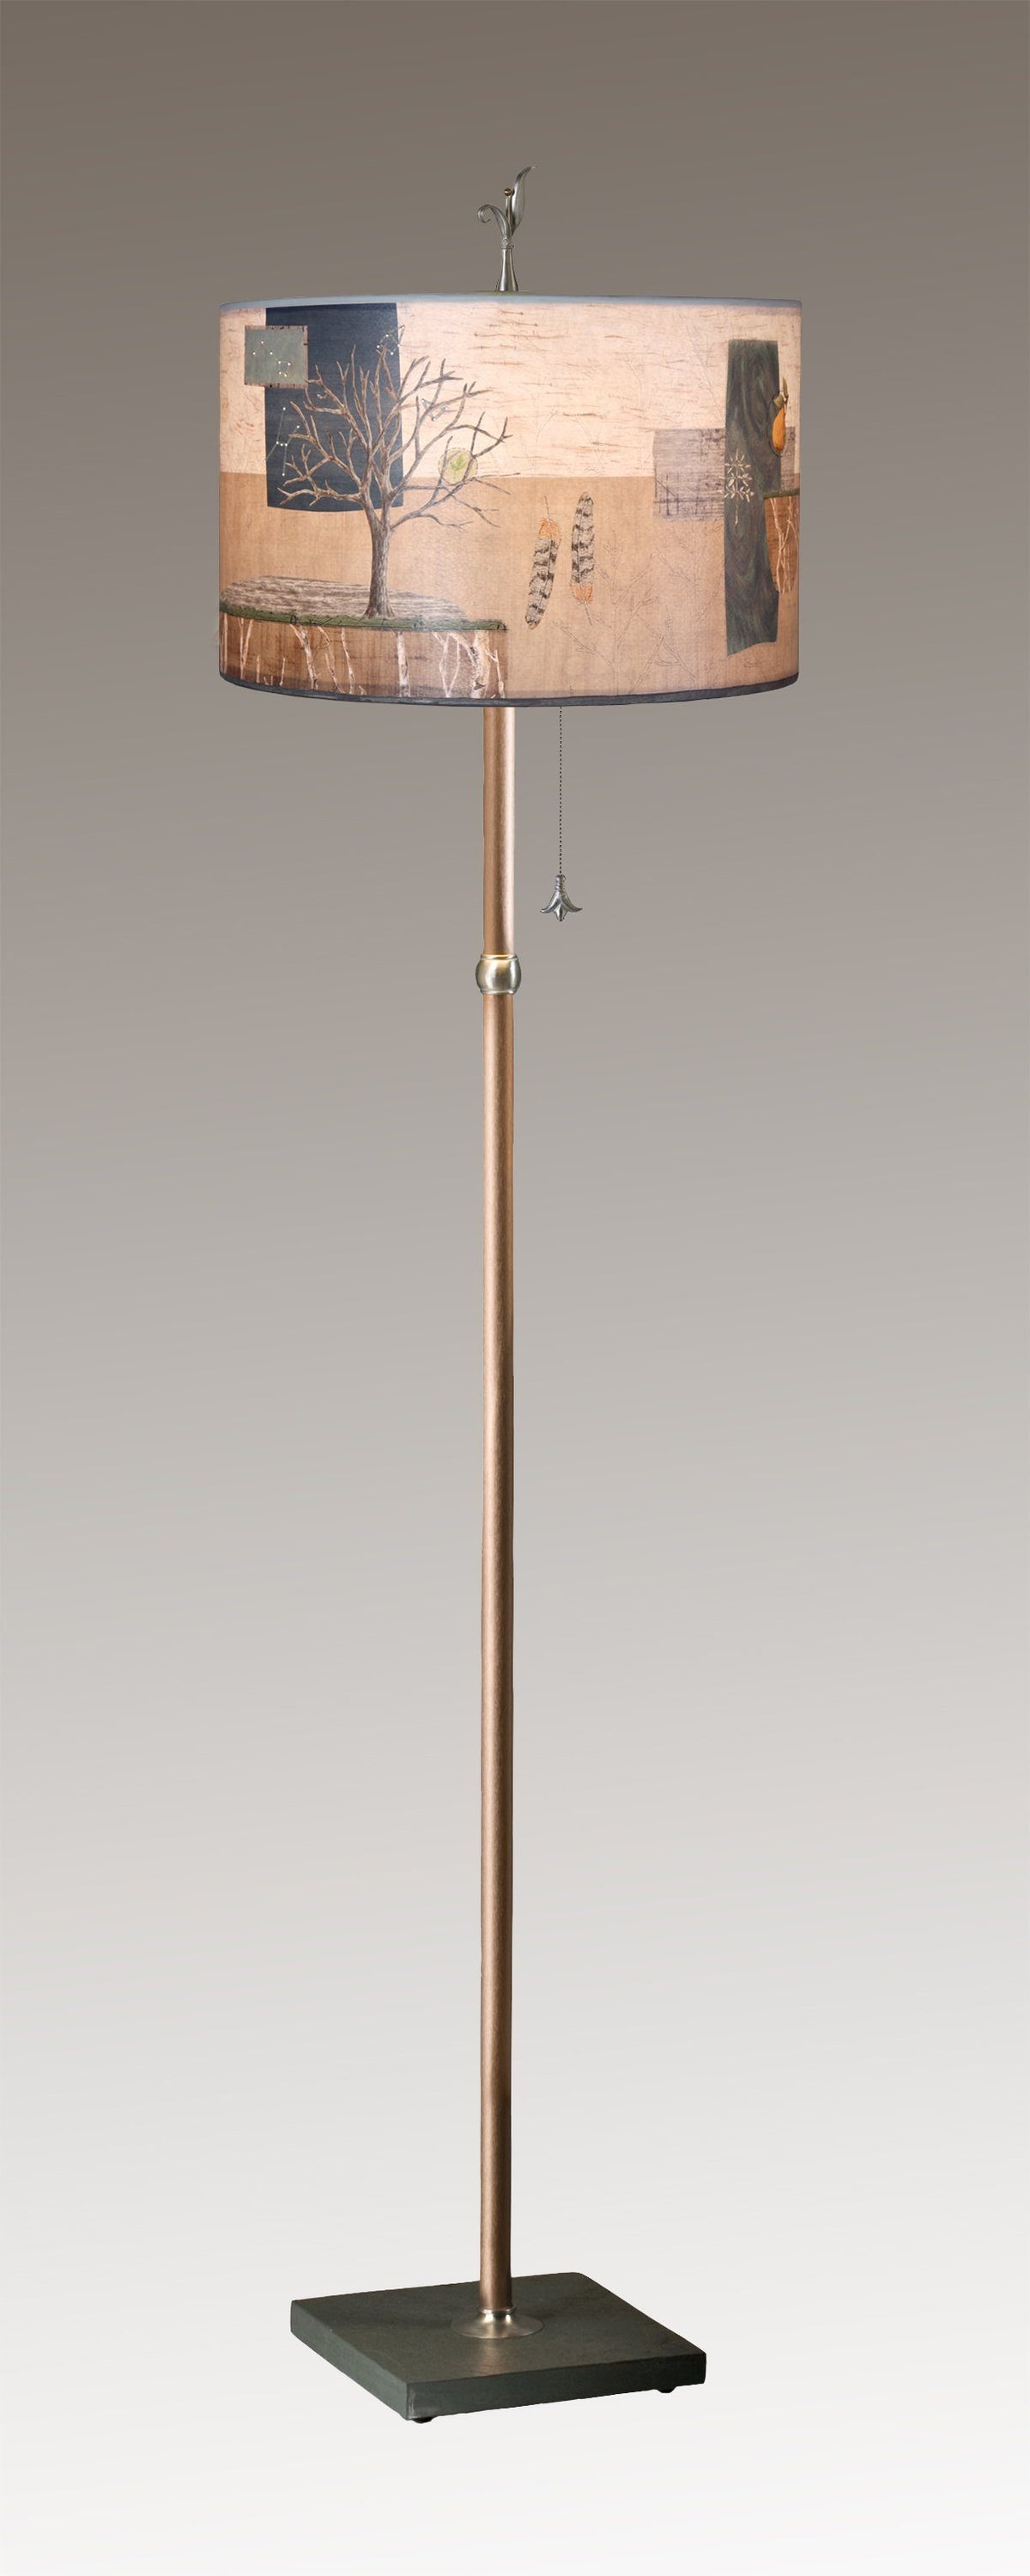 Janna Ugone &amp; Co Floor Lamps Copper Floor Lamp with Large Drum Shade in Wander in Drift